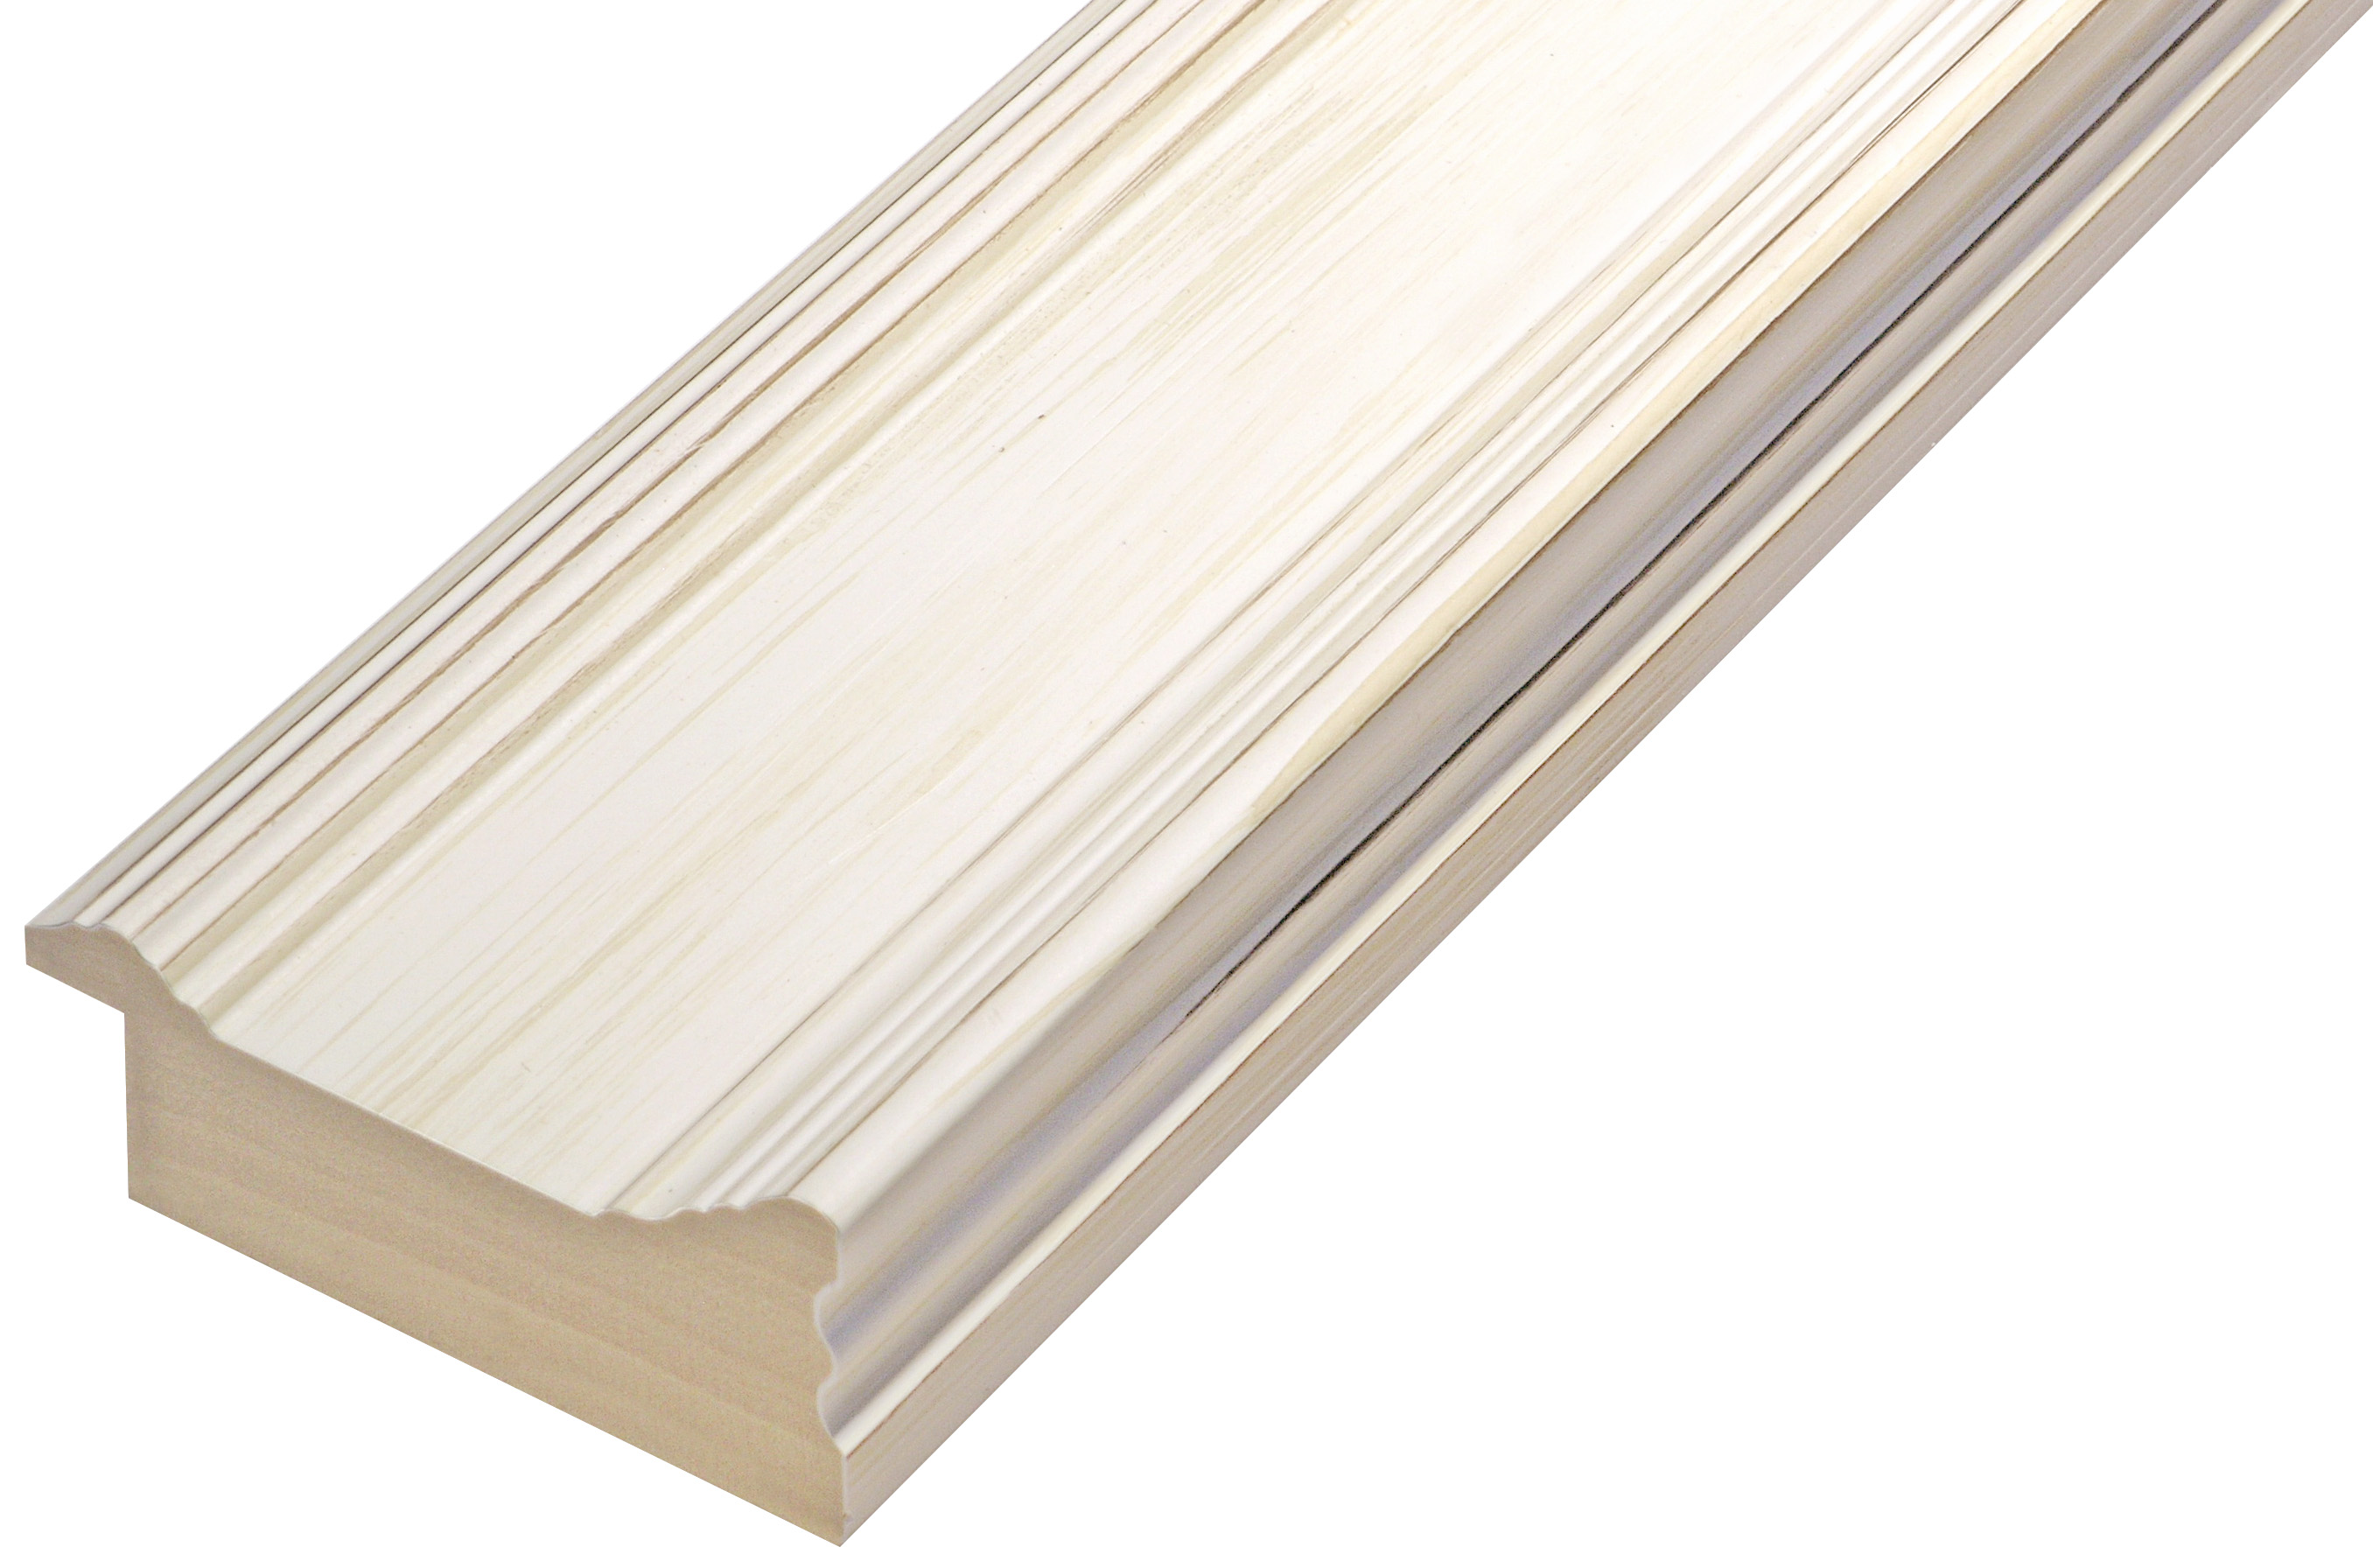 Moulding ayous jointed width 68mm height 30 - Cream finish